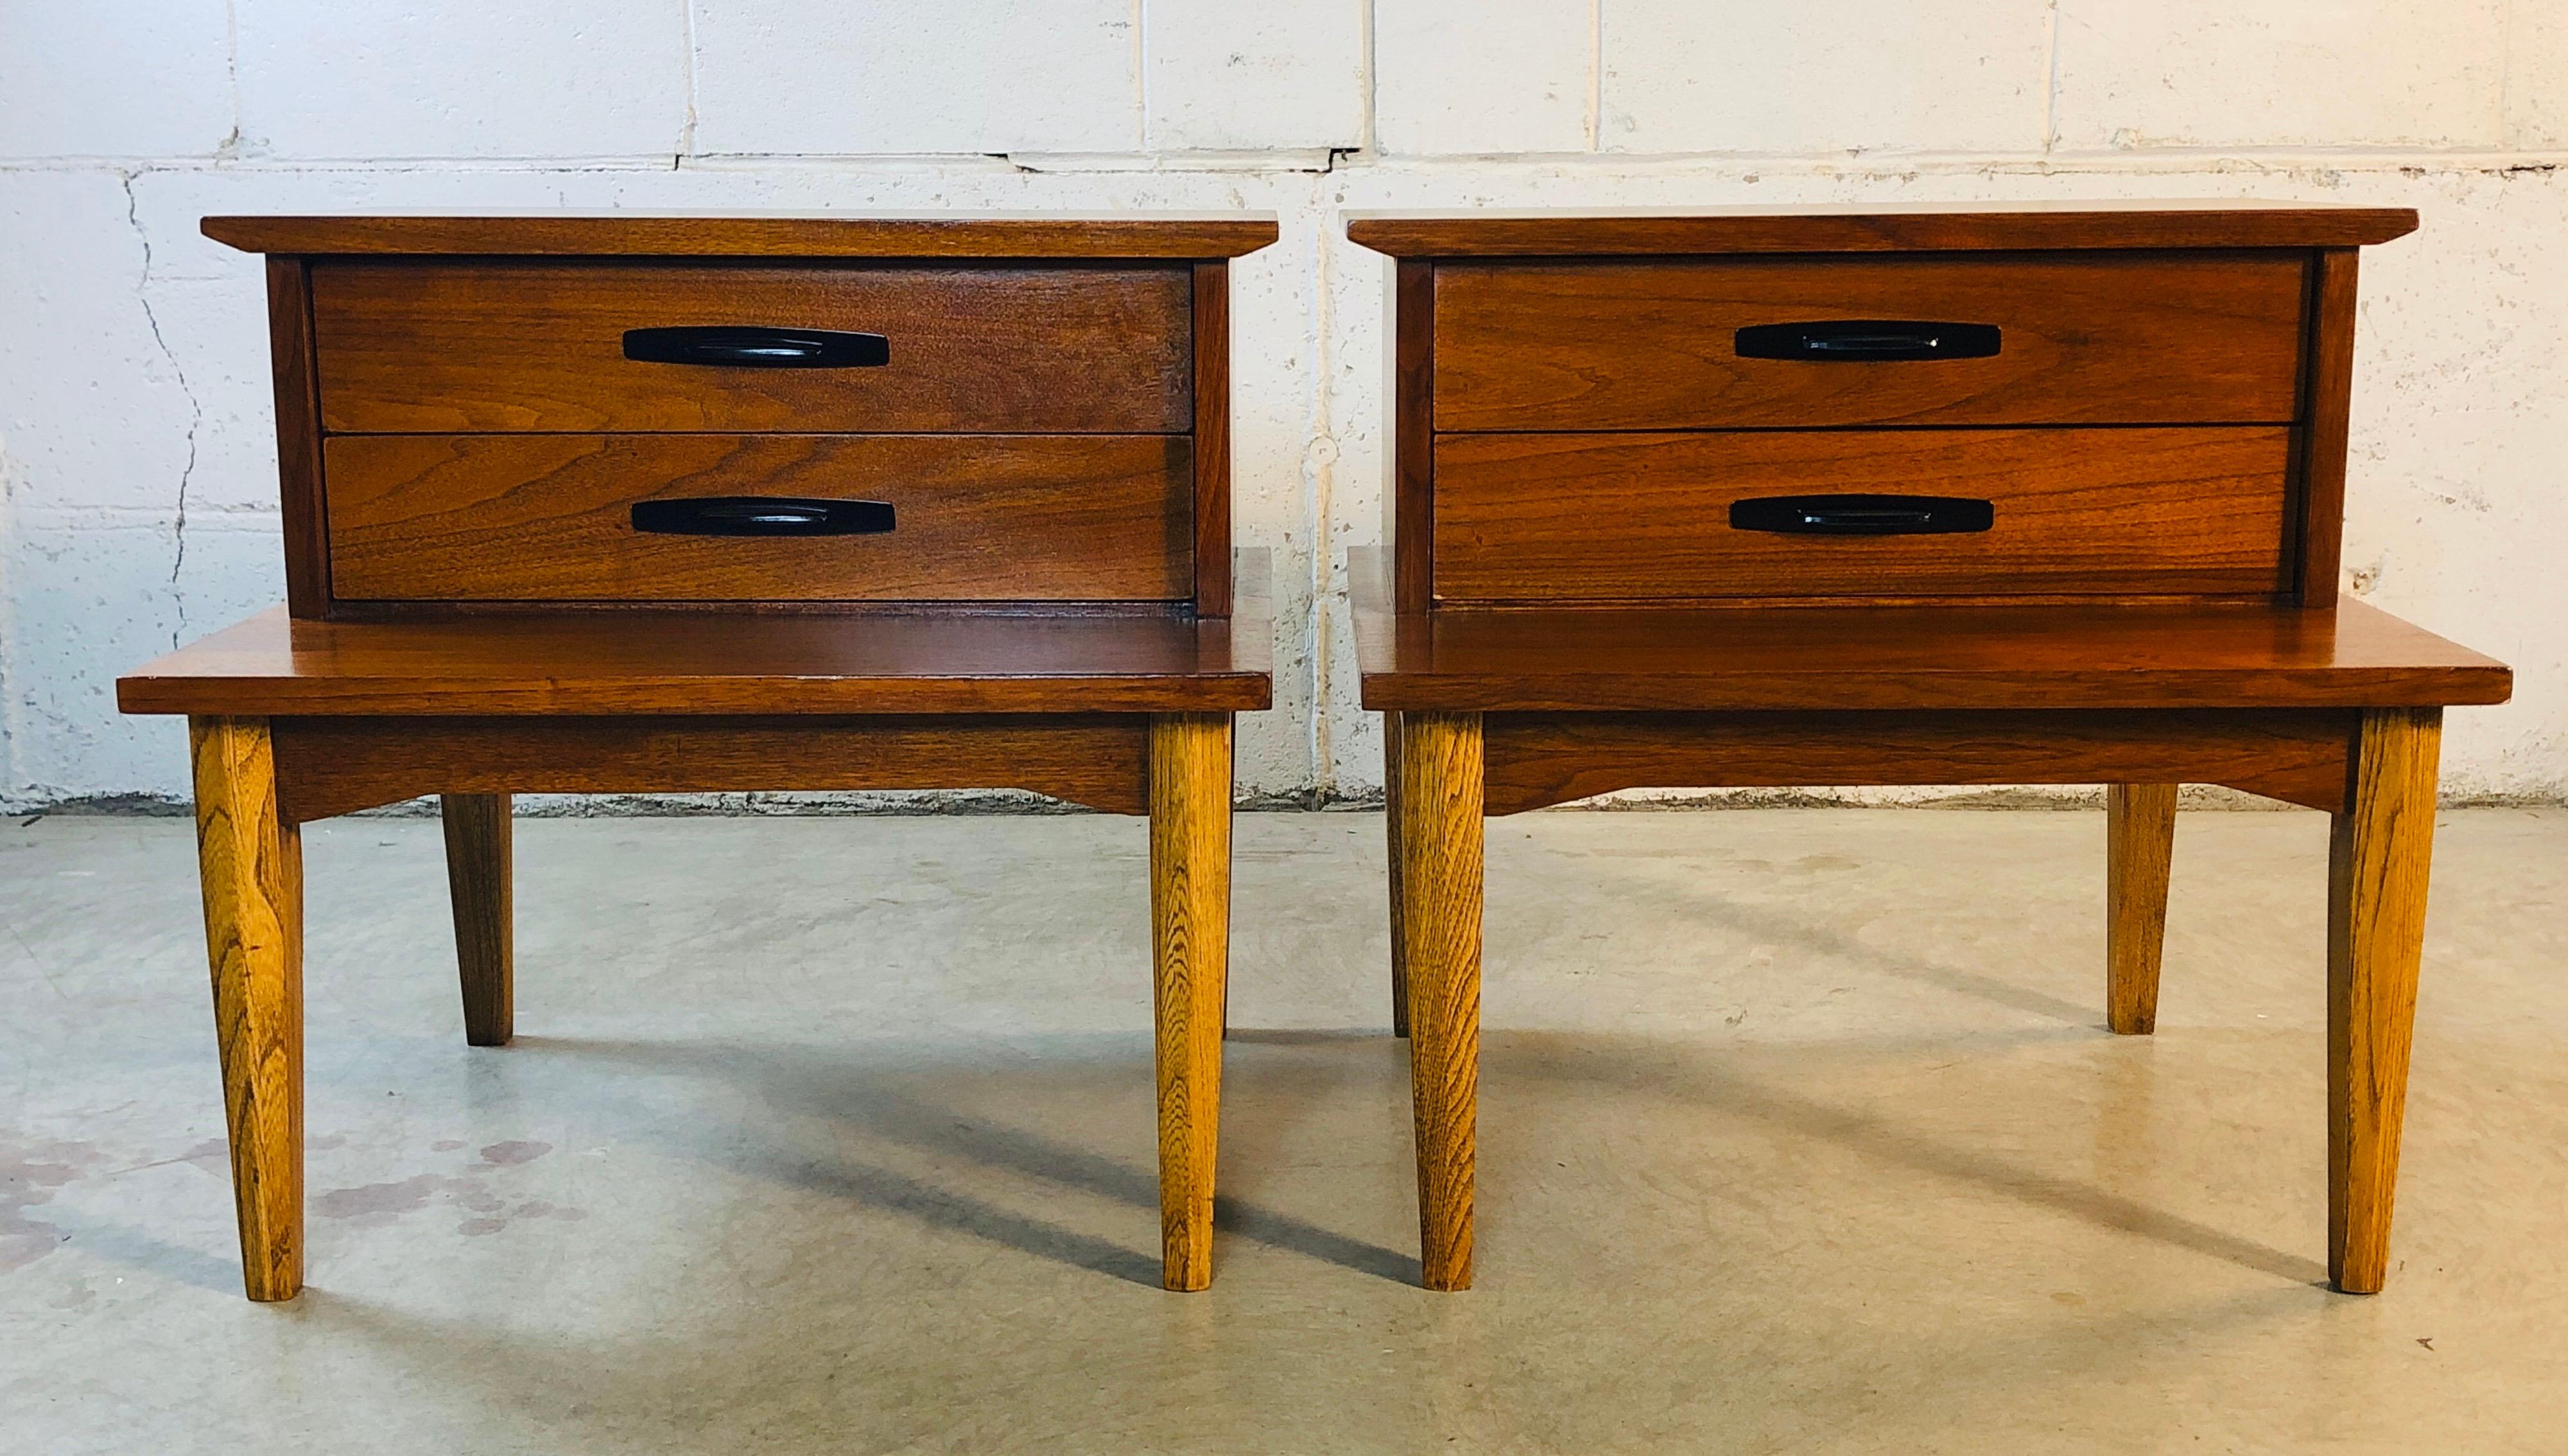 1960s walnut wood step-back style pair of bedroom nightstands by Dixie Furniture Co. The nightstands each have two drawers for storage. They are in restored and refinished condition. Marked in drawer.